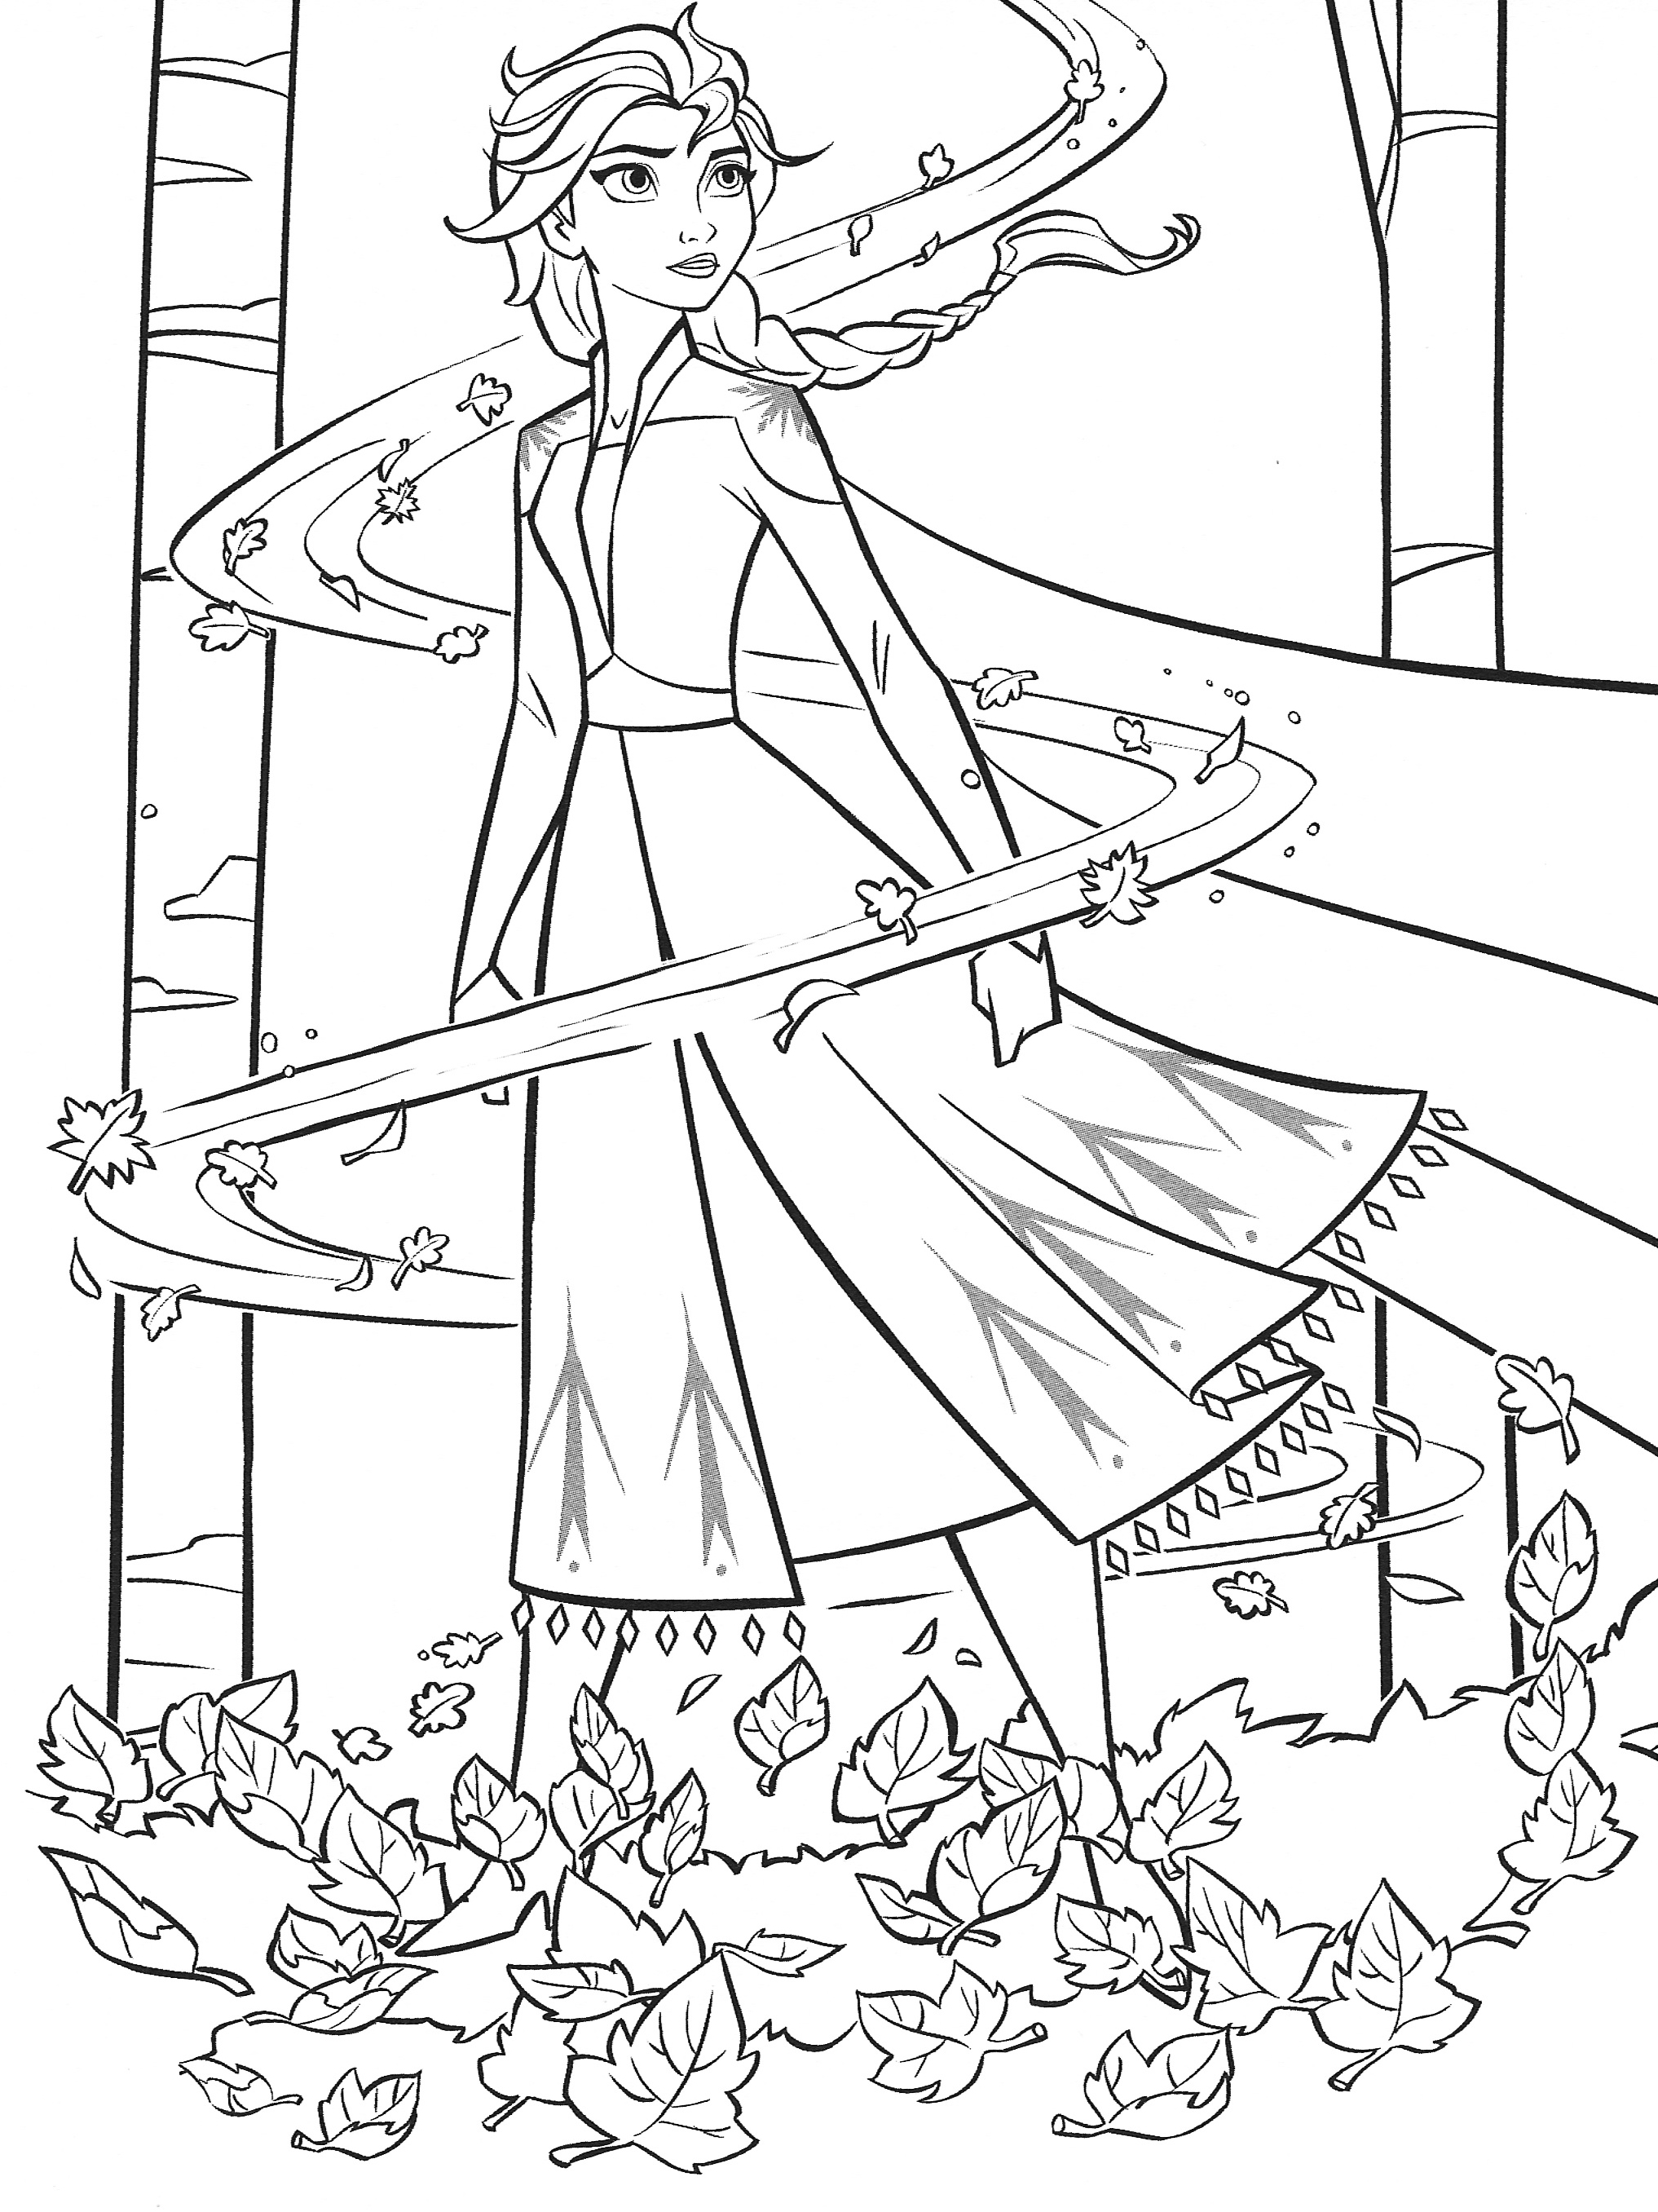 new-frozen-2-coloring-pages-with-elsa-youloveit